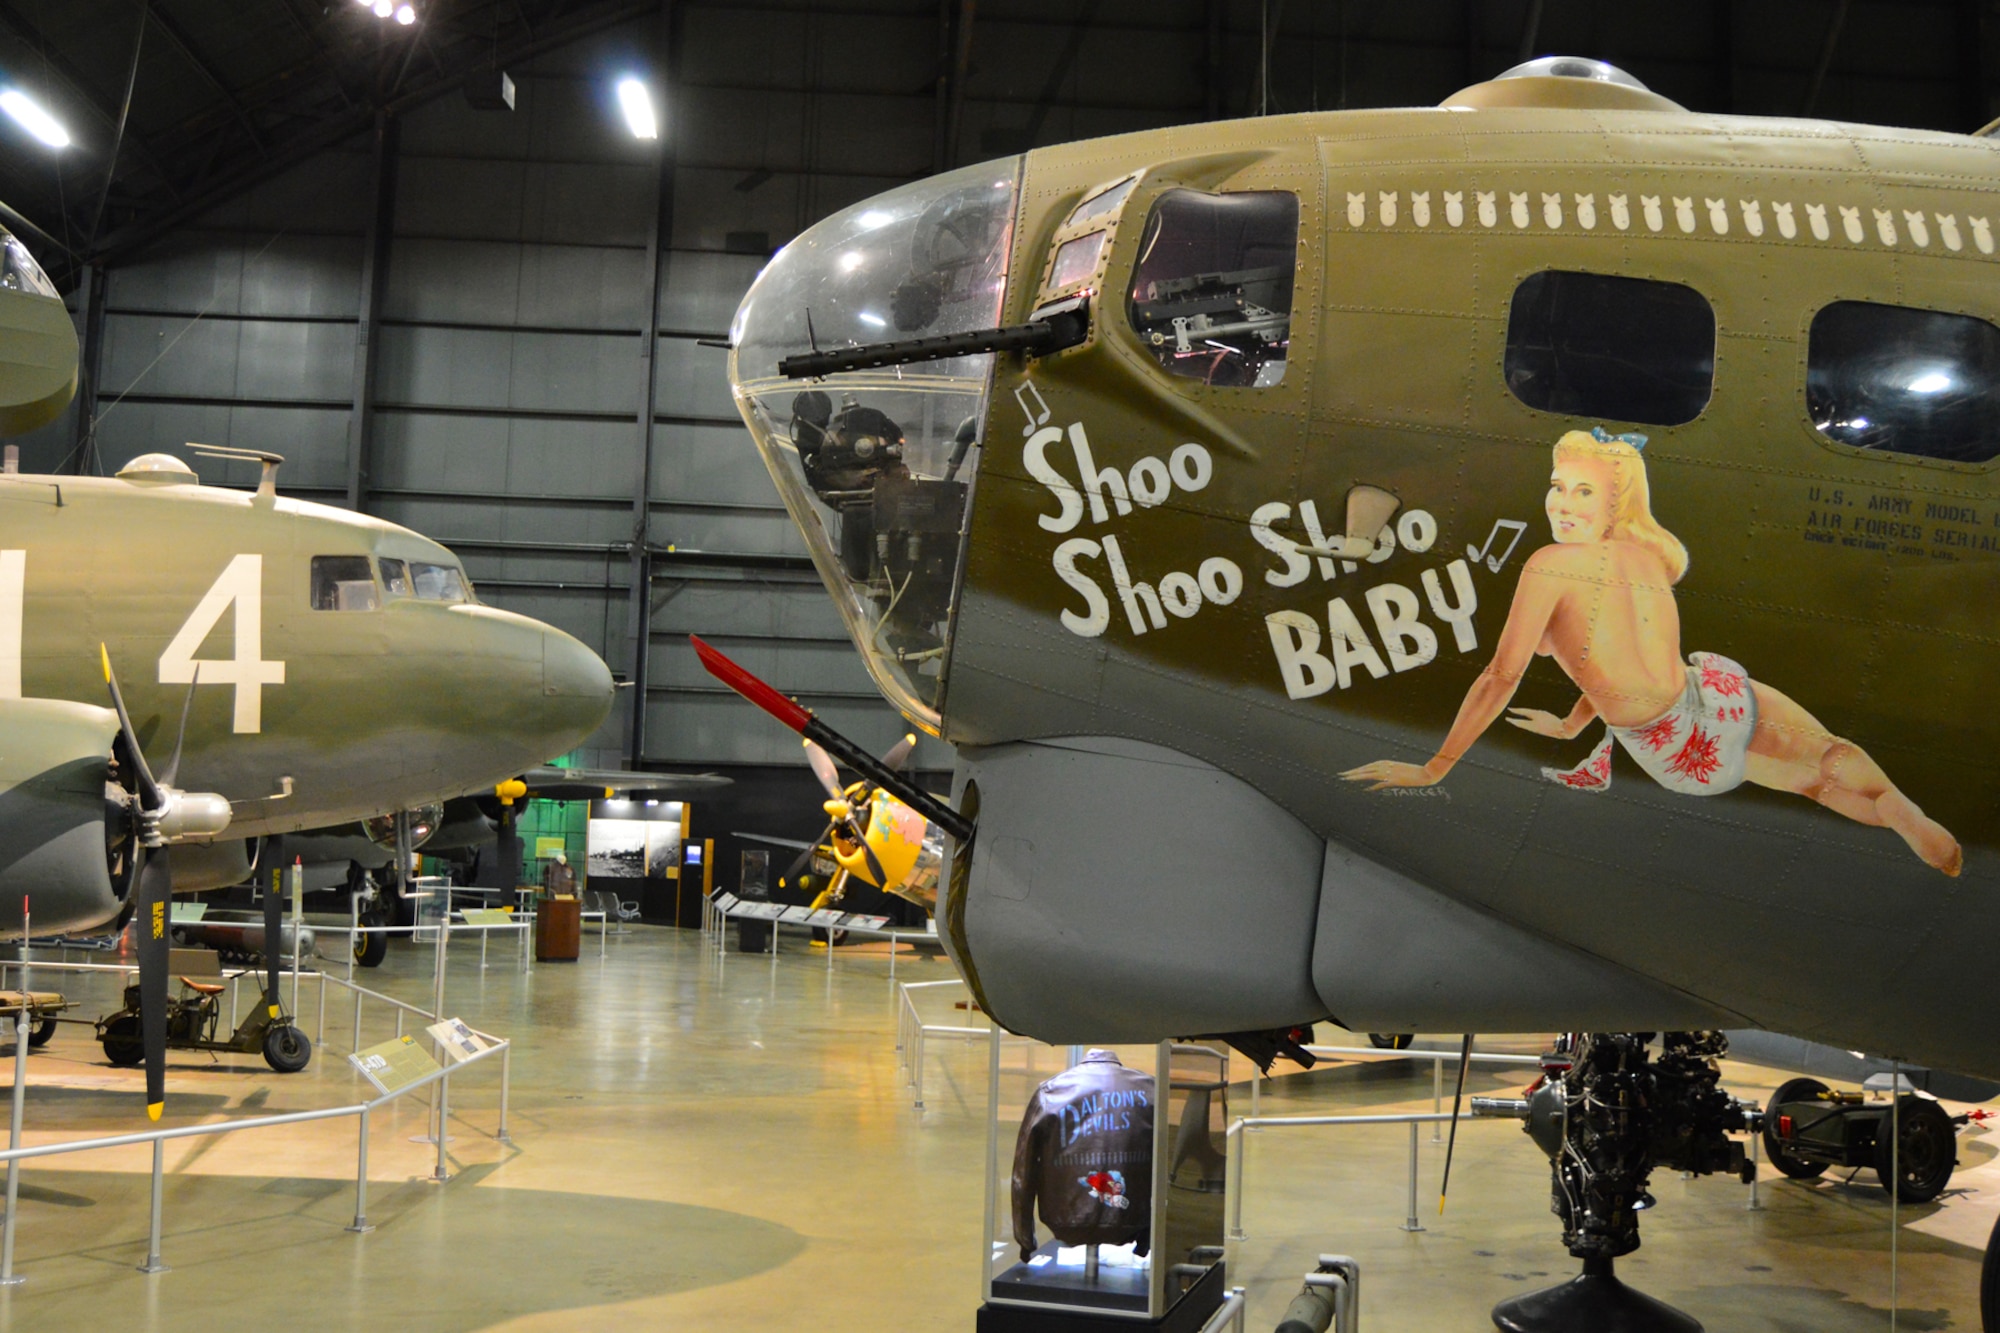 DAYTON, Ohio -- Boeing B-17G Flying Fortress "Shoo Shoo Shoo Baby" (right) and the Douglas C-47D Skytrain (left) in the World War II Gallery at the National Museum of the United States Air Force. (U.S. Air Force photo)